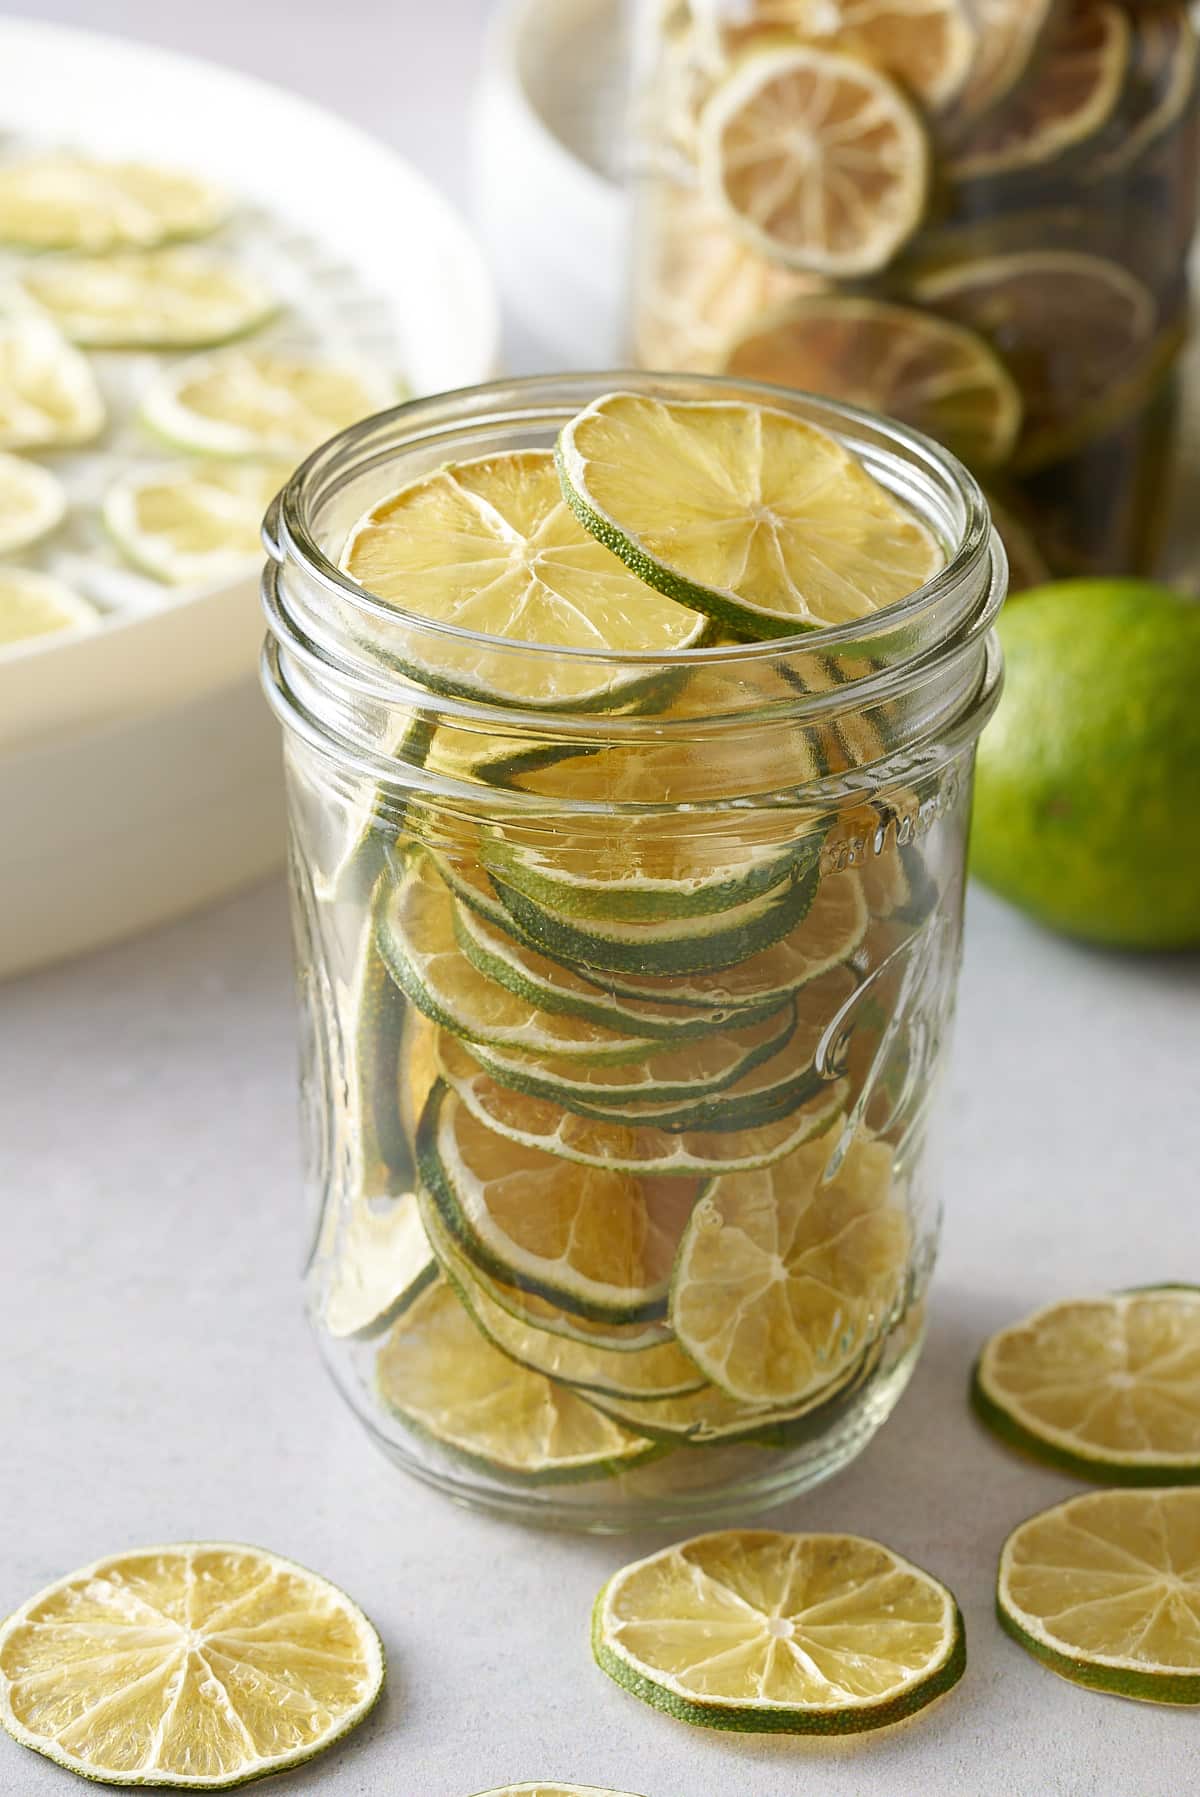 dehydrated limes in glass container